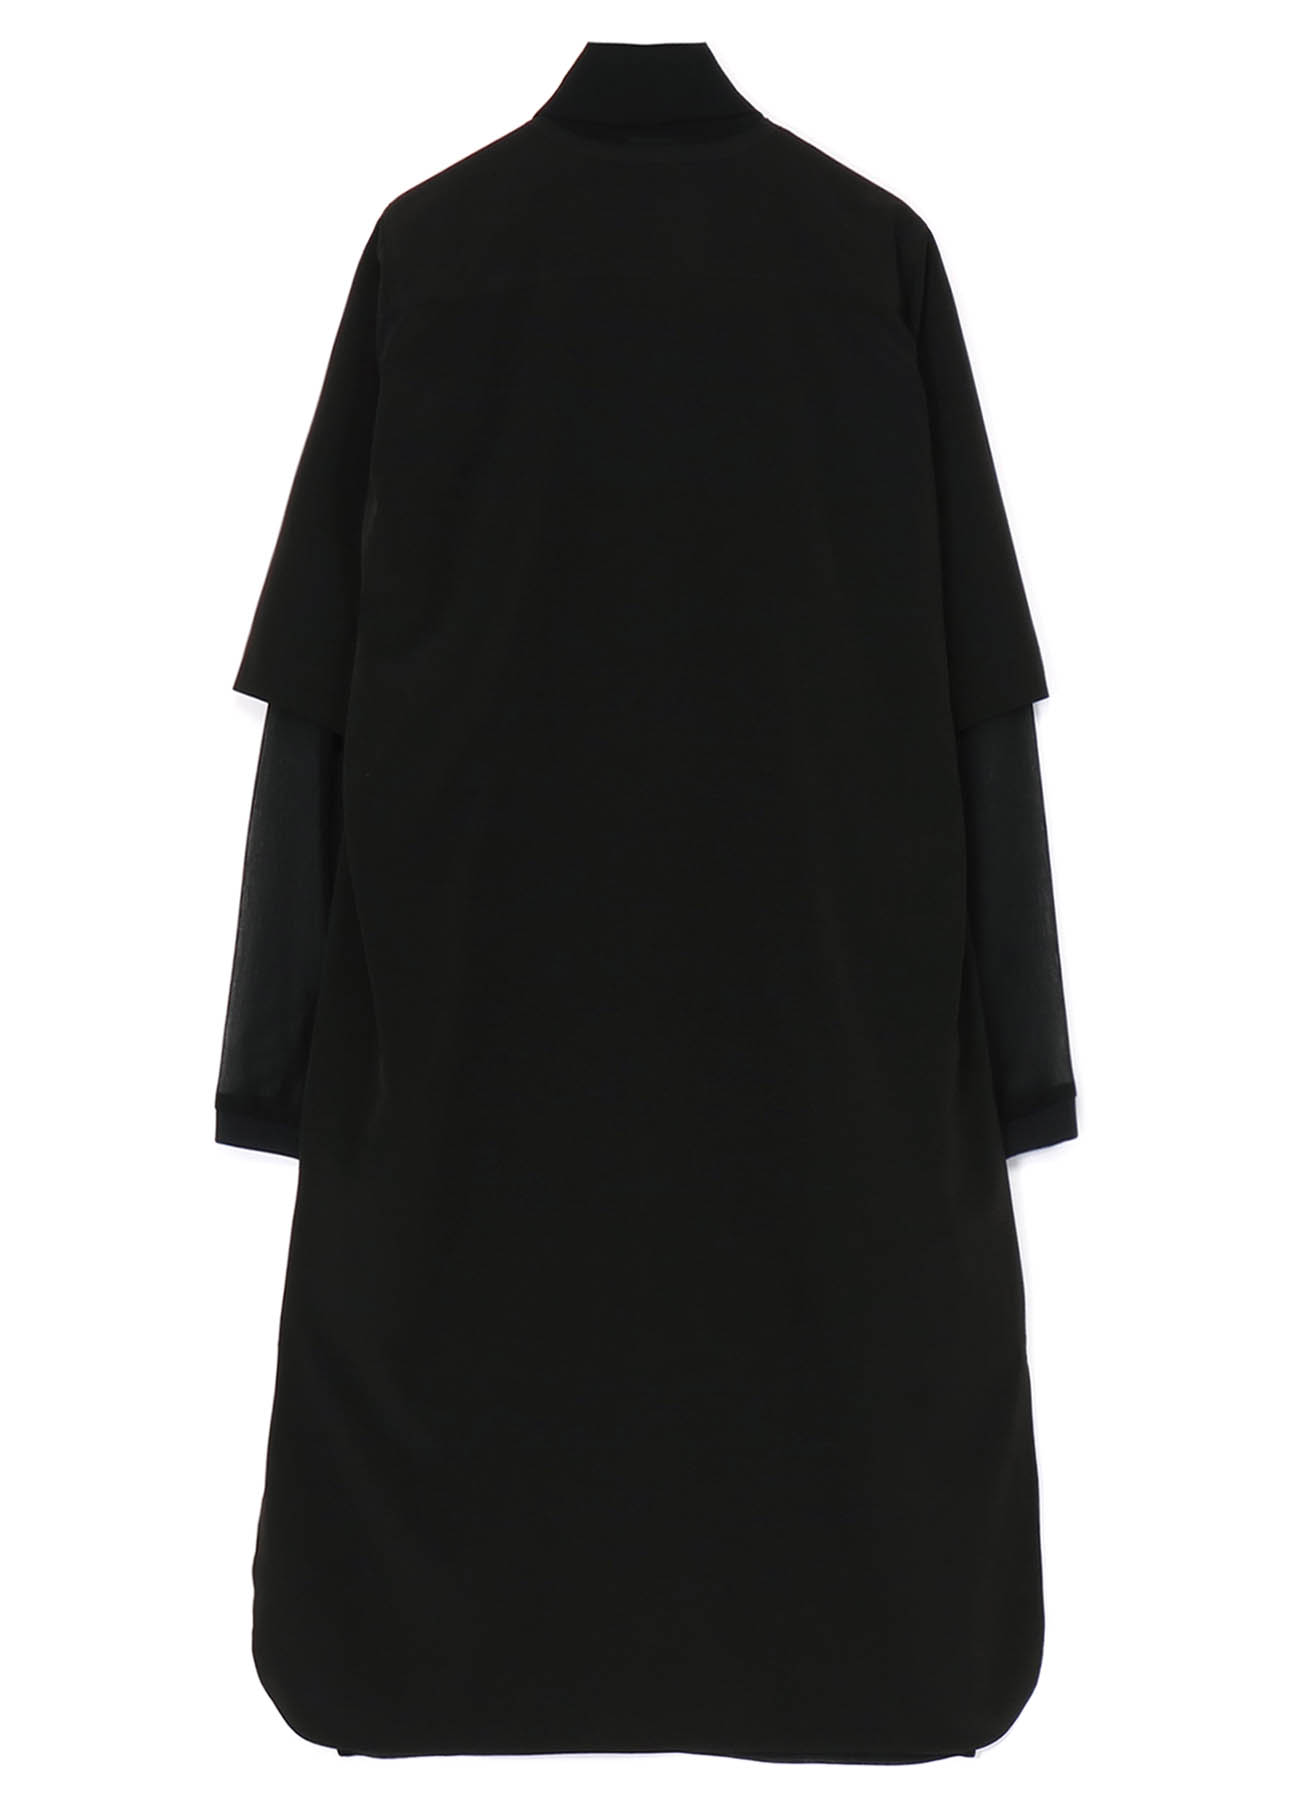 TRIACETATE POLYESTER DOUBLE LAYERED LONG SHIRT